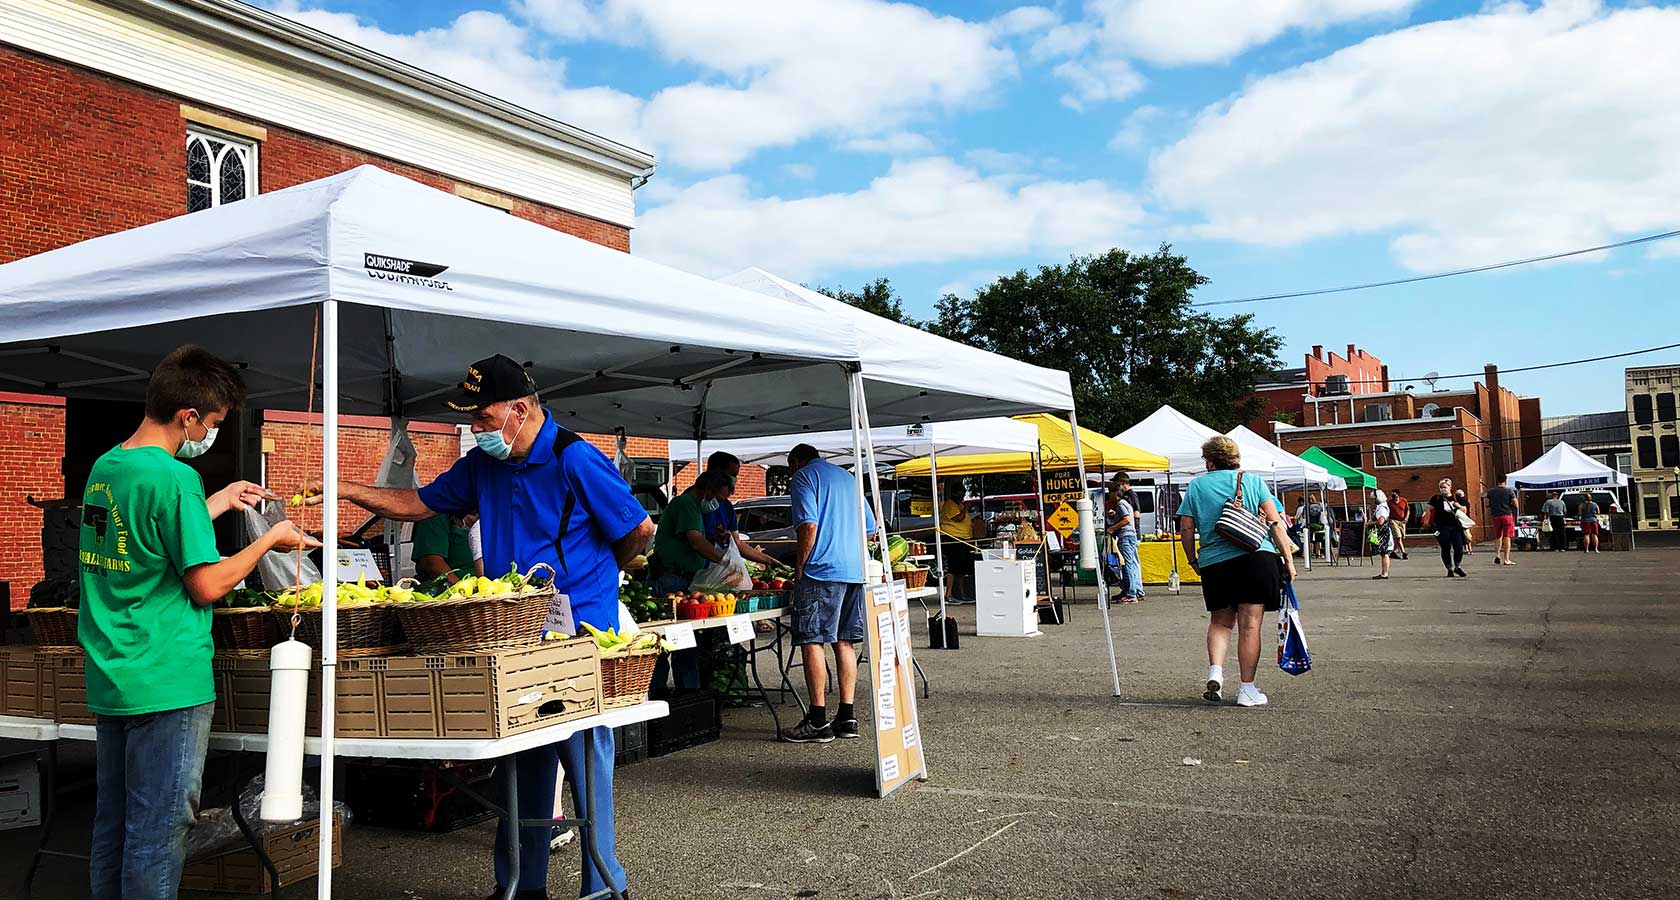 Scene of vendors and shoppers at farmer’s market tents